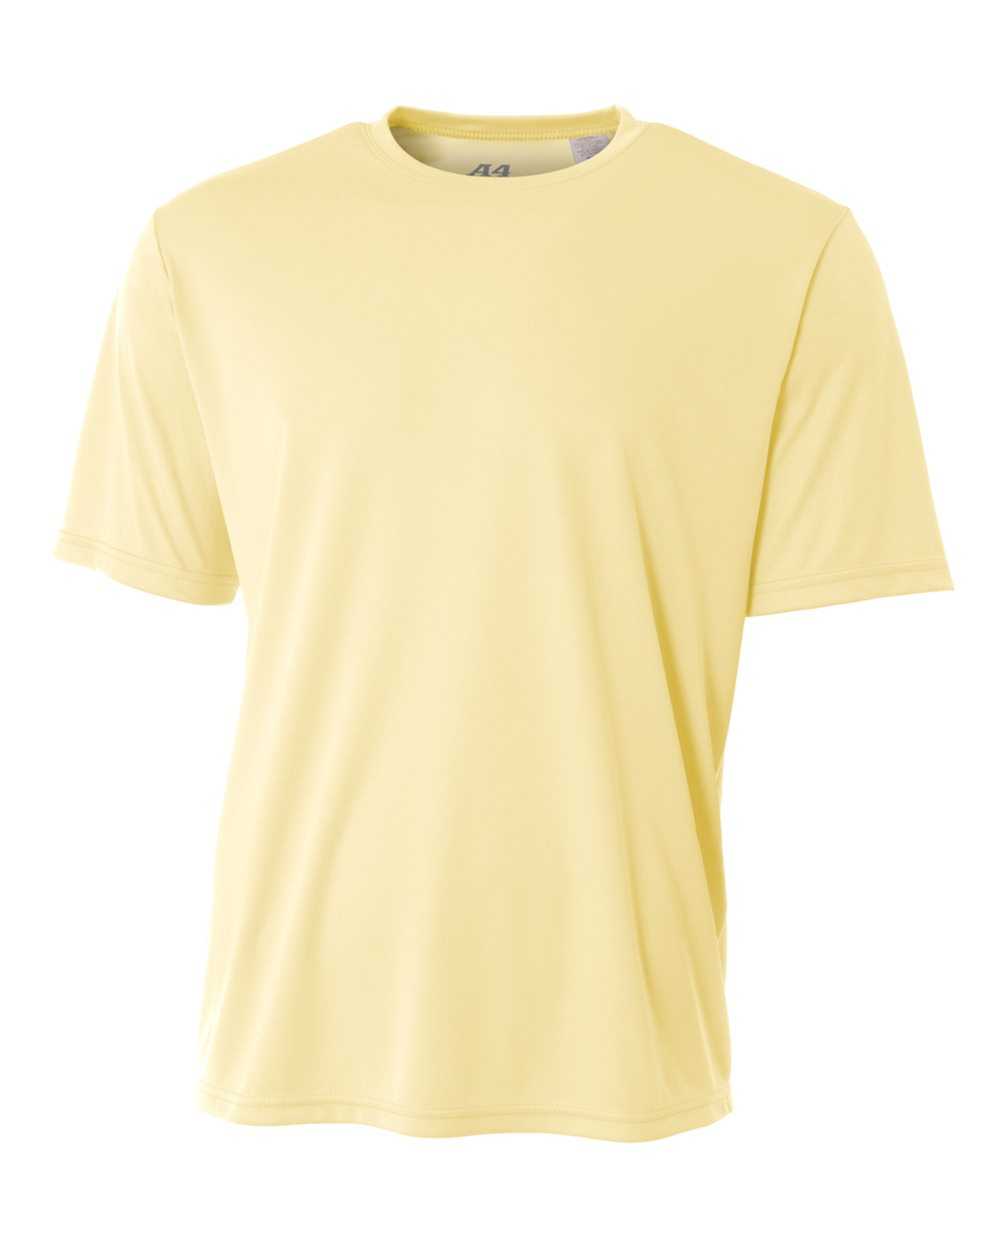 A4 N3142 Cooling Performance Crew - Light Yellow - HIT a Double